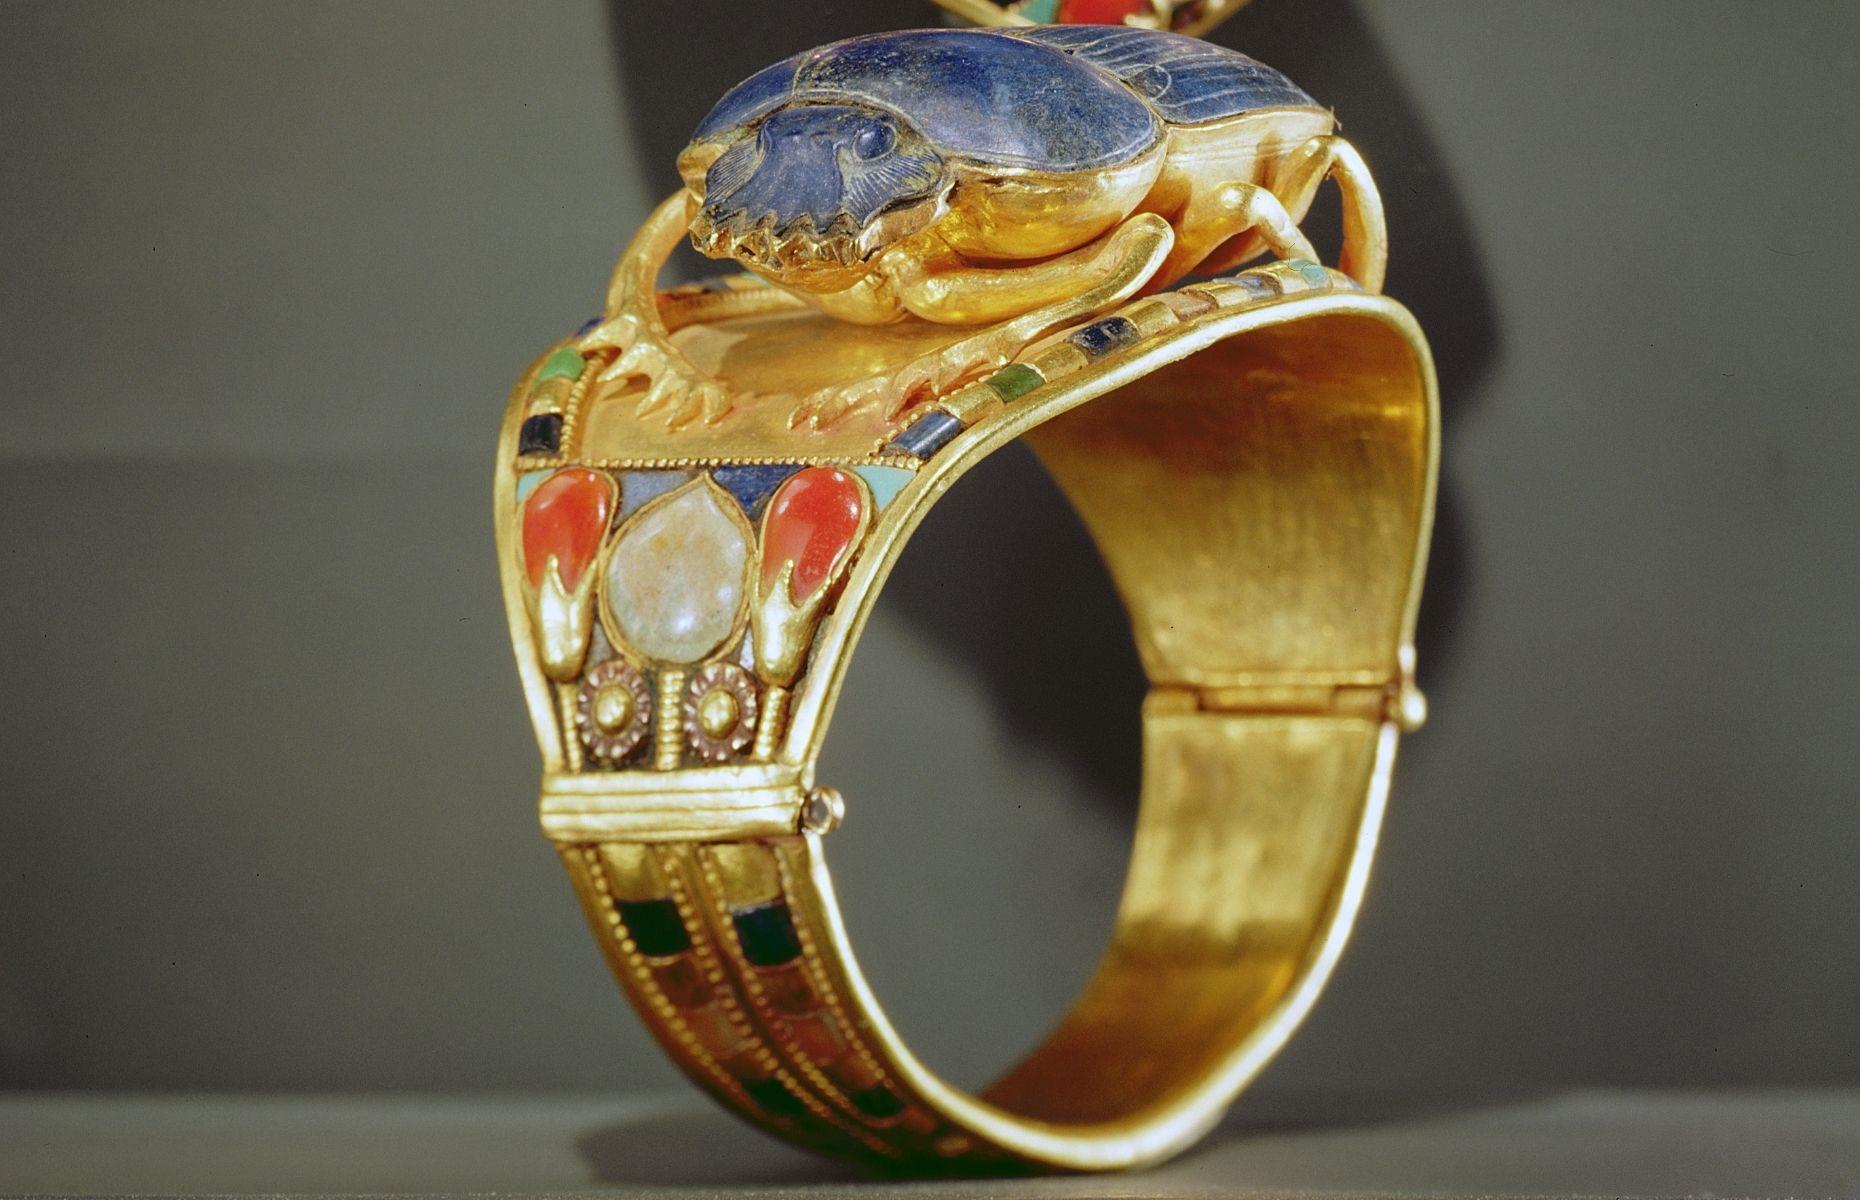 <p>Ornate jewellery was commonly stored inside Egyptian pyramids, either as divine offerings or to accompany the deceased into the afterlife. This spectacular scarab bracelet is just one of the items found inside Tutankhamun's tomb. Formed from gold and lapis lazuli, the intricate trinket is a gorgeous example of ancient craftsmanship. Regardless of <a href="https://www.gemrockauctions.com/learn/did-you-know/ancient-egyptian-jewellery#:~:text=The%20ornaments%20included%20heart%20scarabs,,%20animal%20teeth,%20and%20shells.">gender or status</a>, the Egyptians loved jewellery, and over the centuries endless precious charms and ornaments have been discovered.</p>  <p><a href="https://www.loveexploring.com/galleries/154669/atlantis-and-other-incredible-lost-cities-around-the-world?page=1"><strong>Discover the possible locations of legendary Atlantis</strong></a></p>